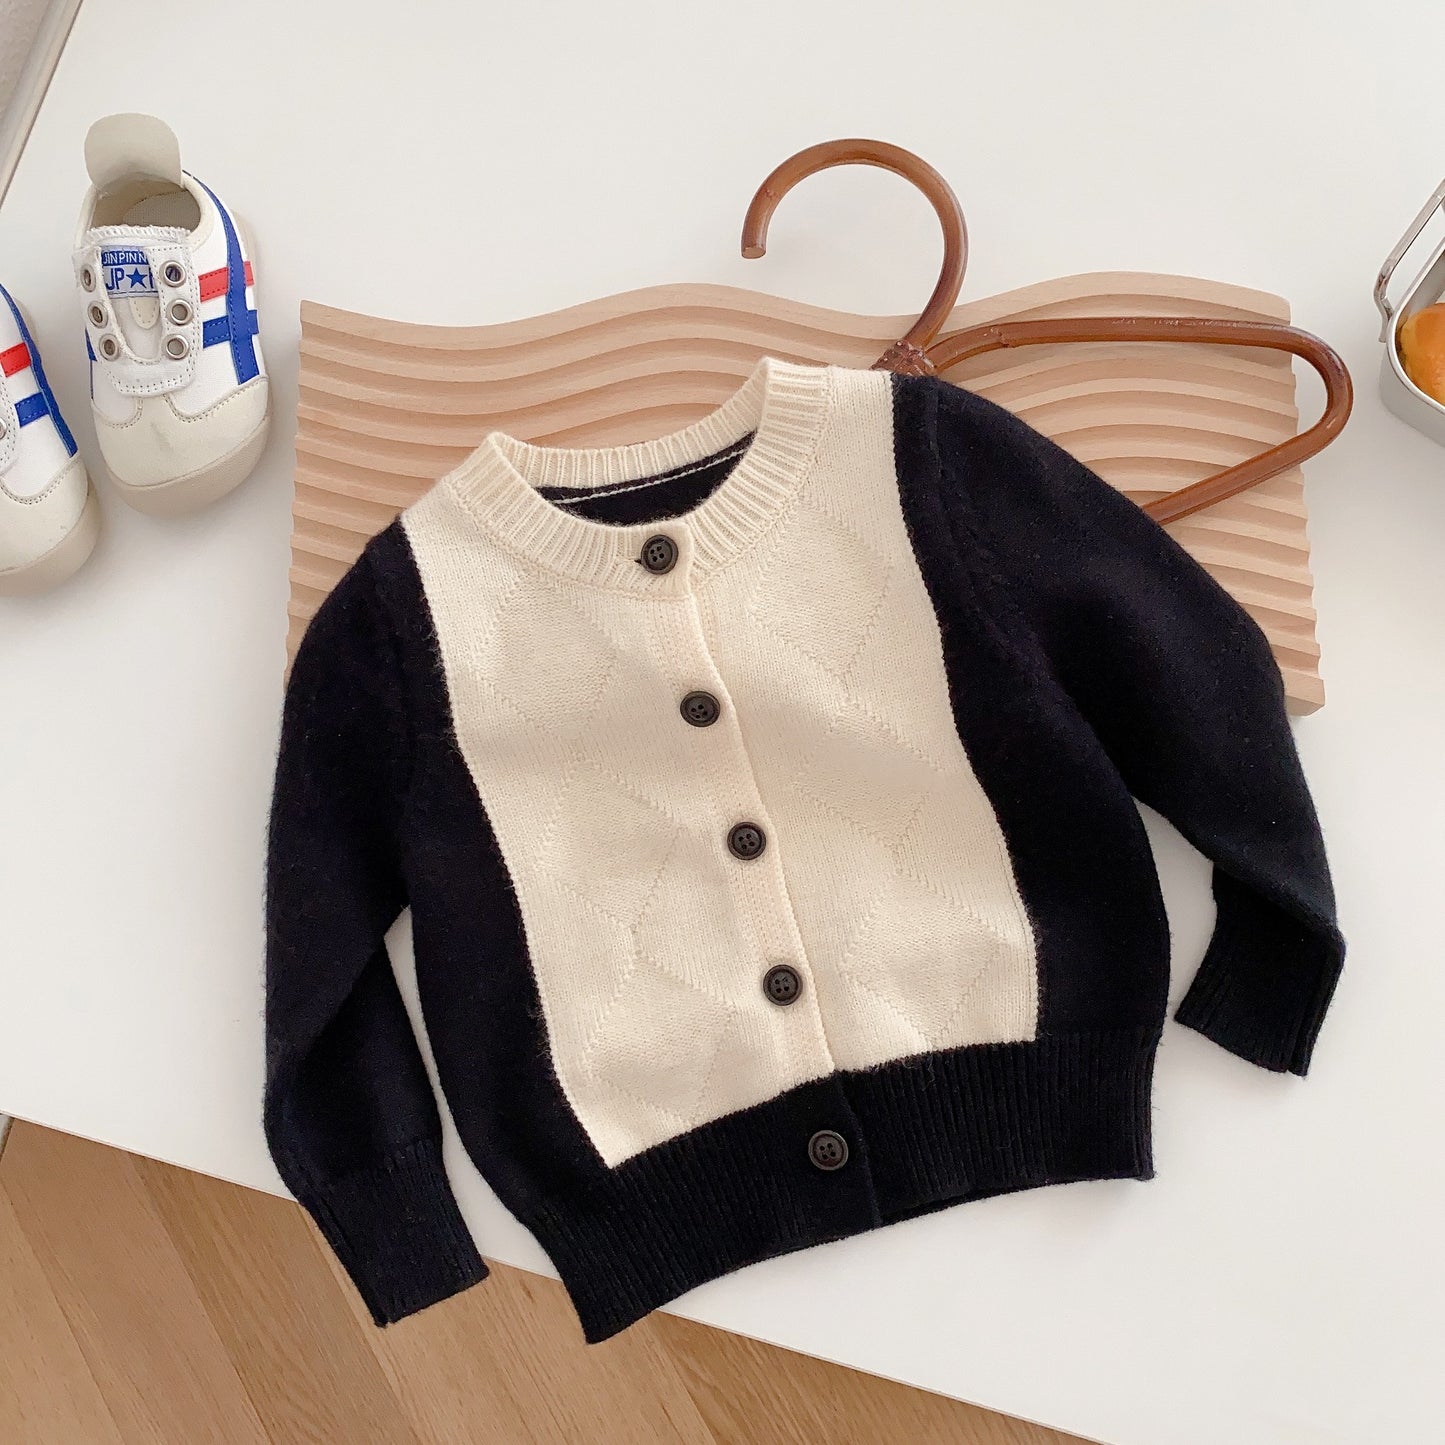 Toddler Girls Knit Warm Sweater Crew Neck Black and White Color